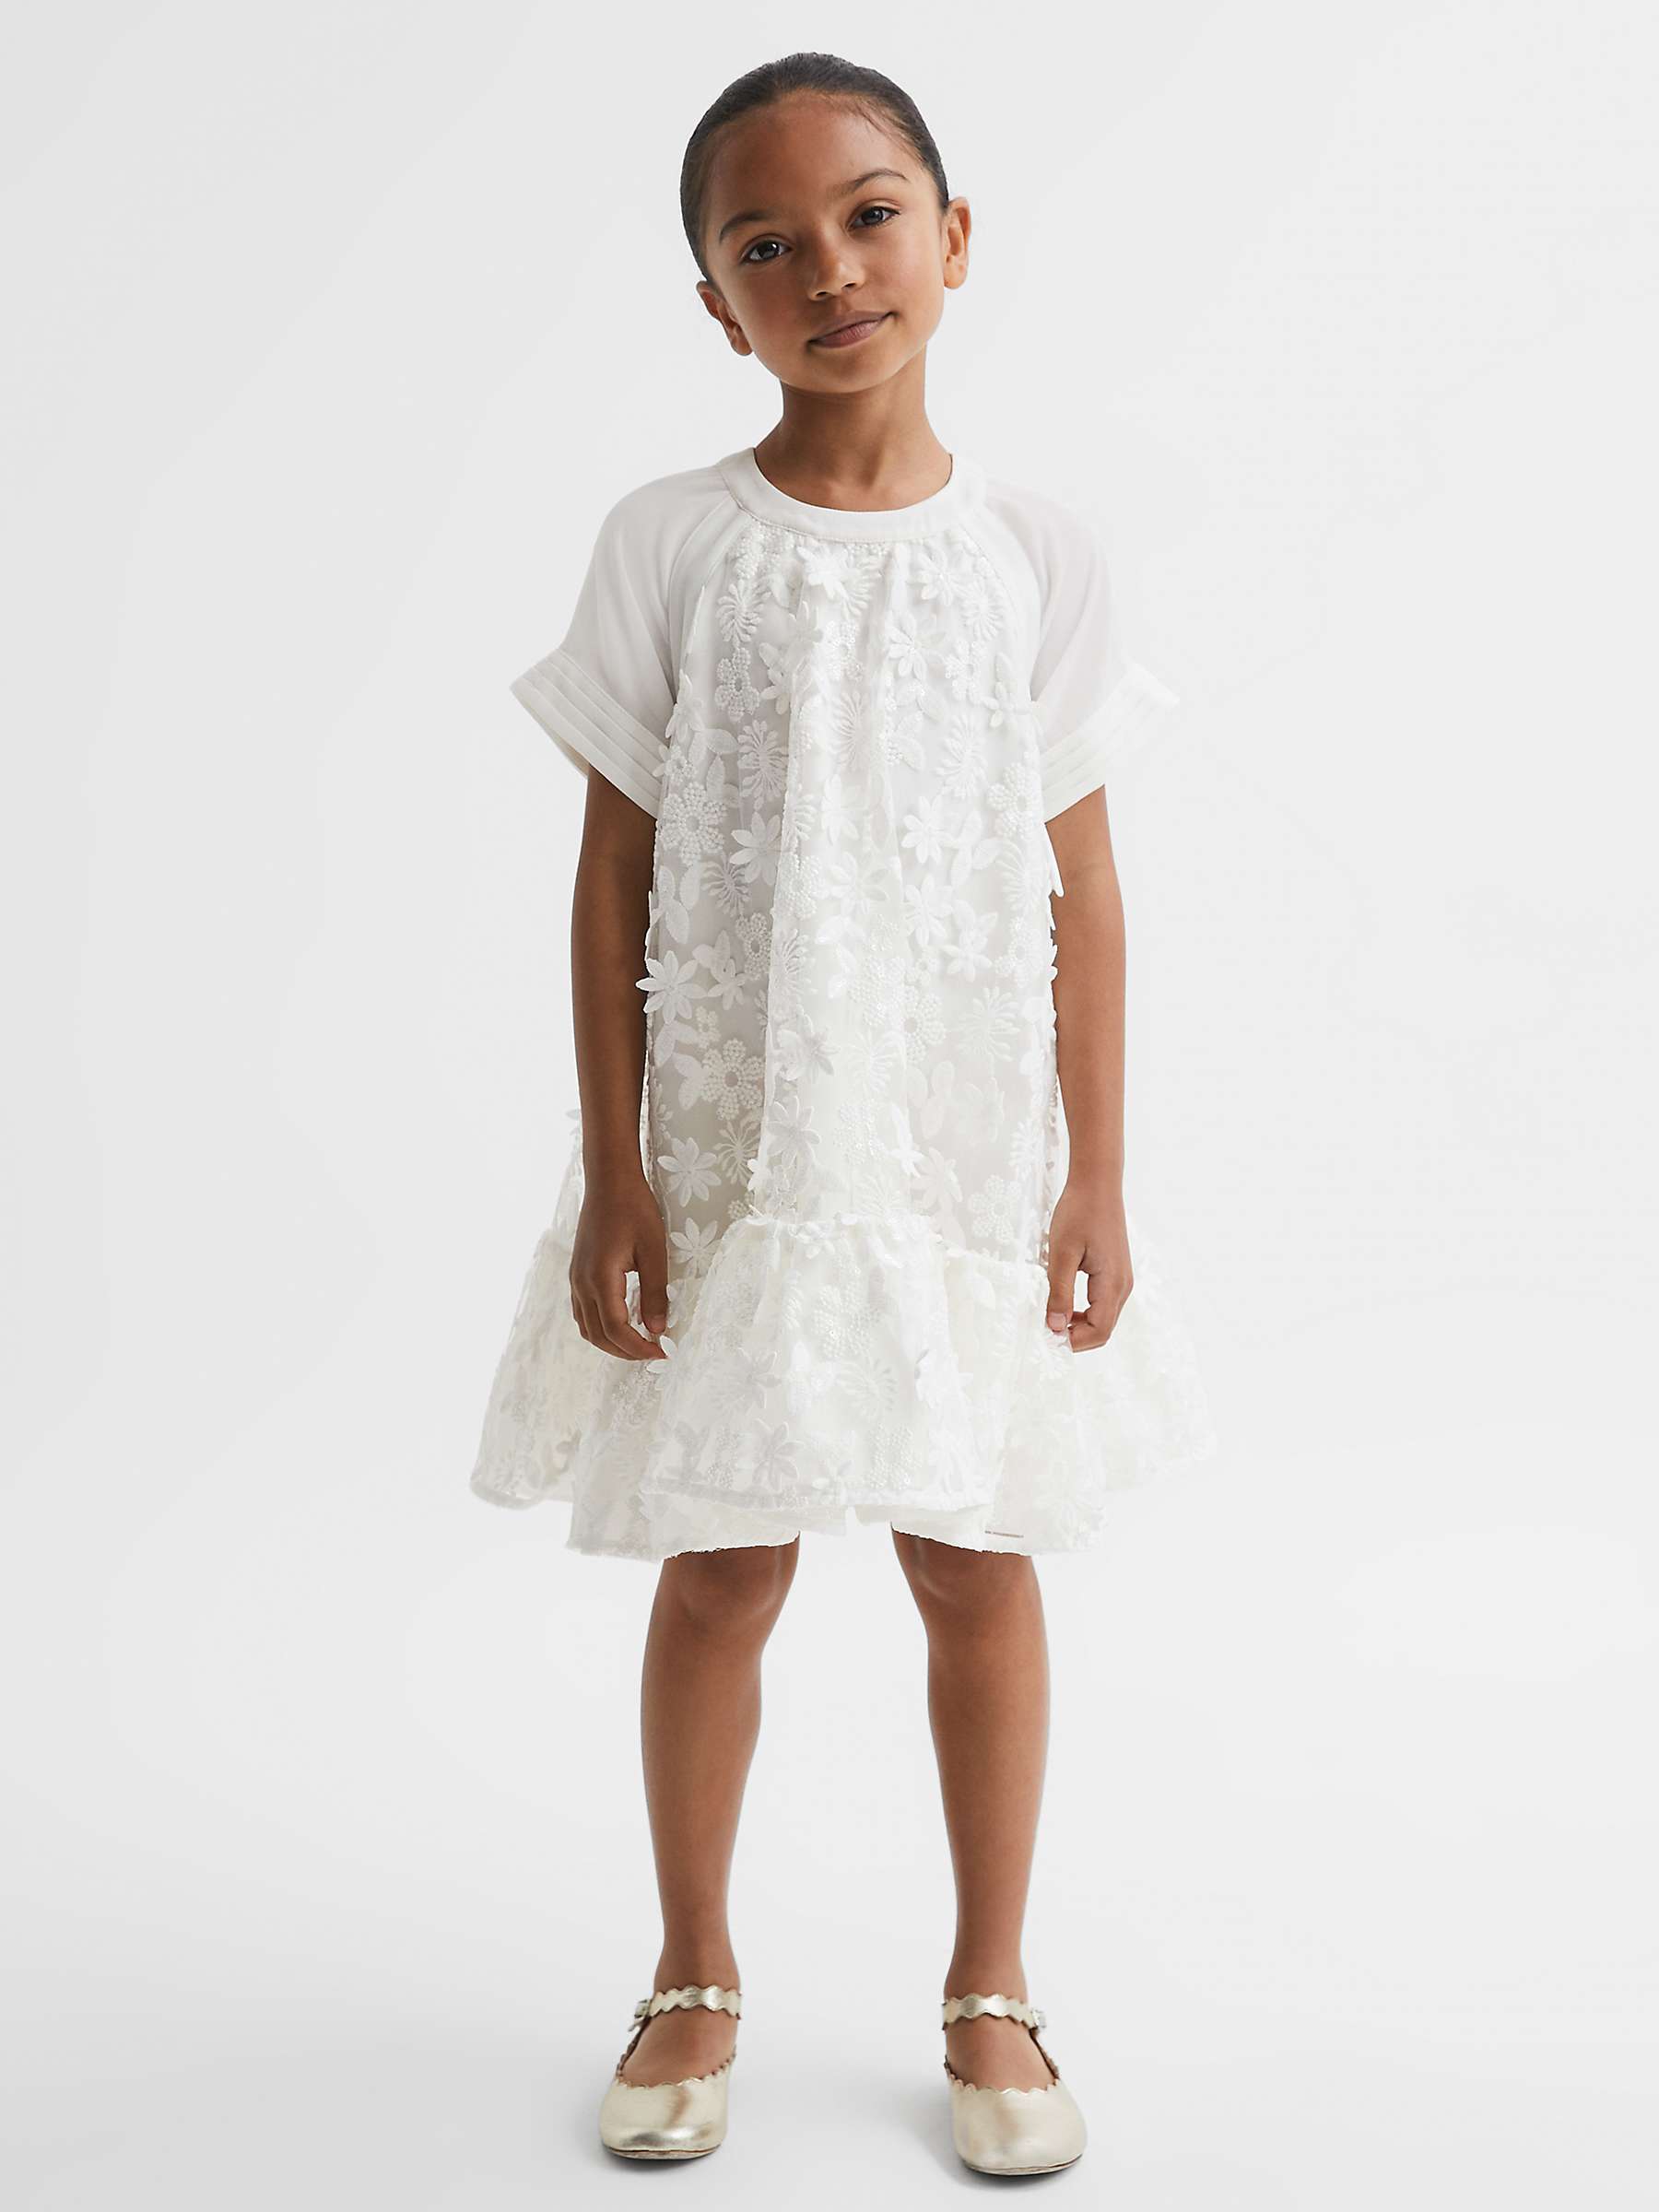 Buy Reiss Kids' Theo Floral Lace Dress, Ivory Online at johnlewis.com